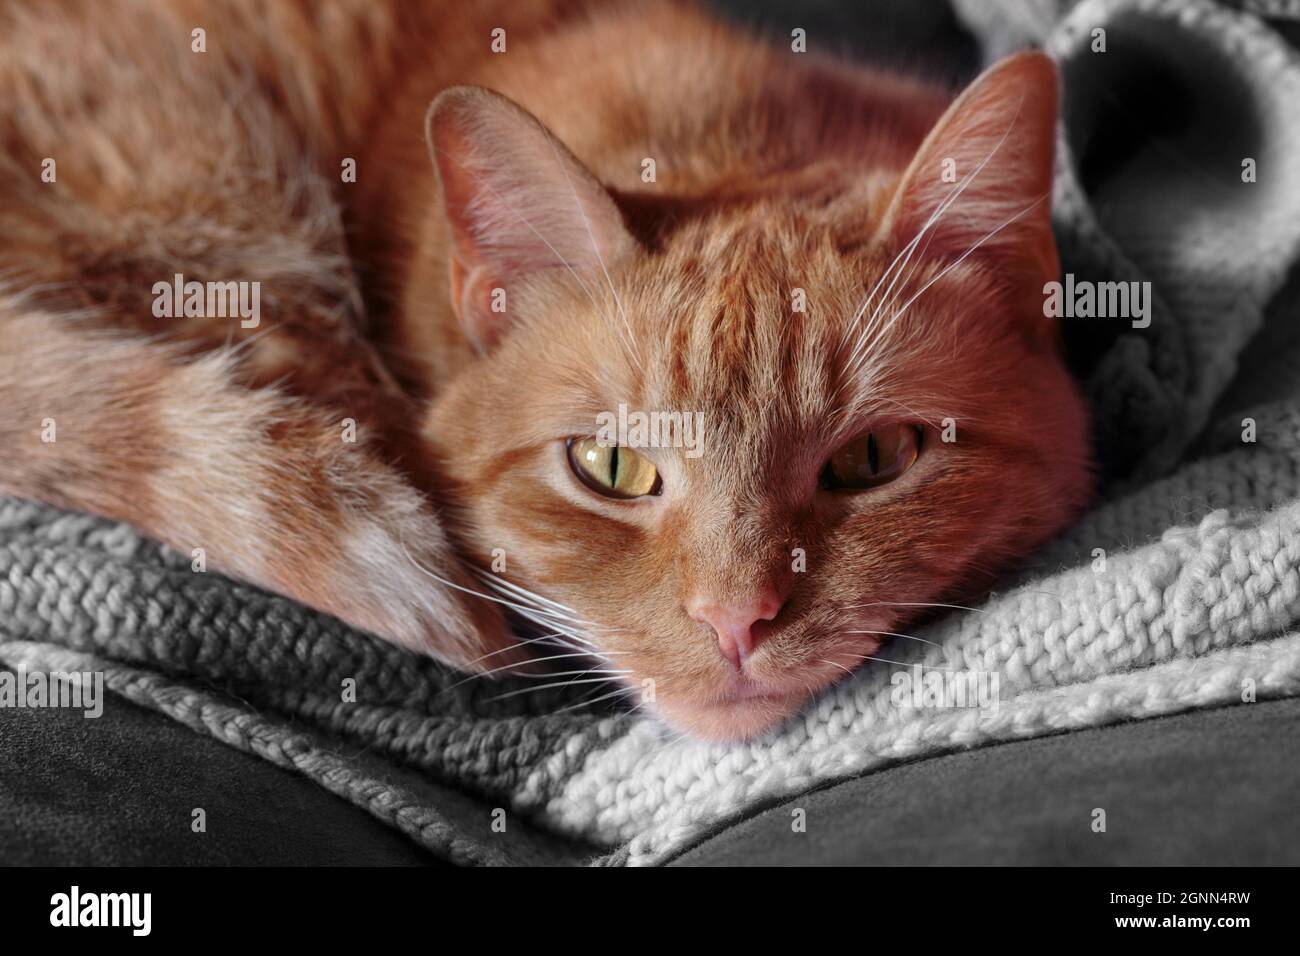 face close up of an orange tabby cat with copper eyes curled up on a blanket staring at the camera Stock Photo